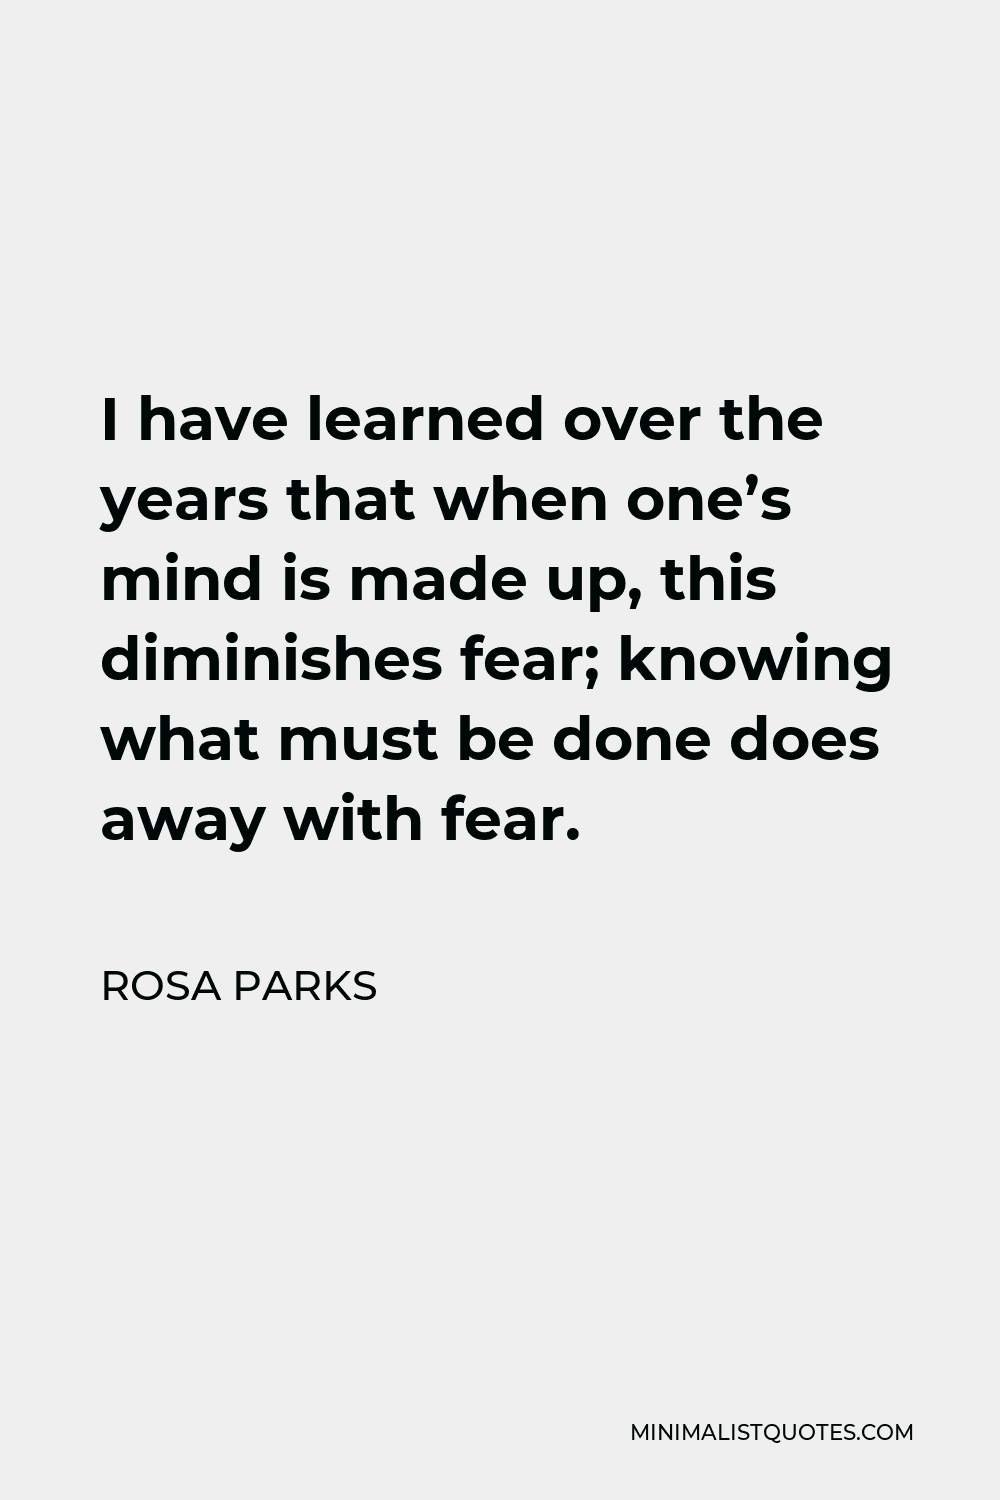 Rosa Parks Quote - I have learned over the years that when one’s mind is made up, this diminishes fear; knowing what must be done does away with fear.